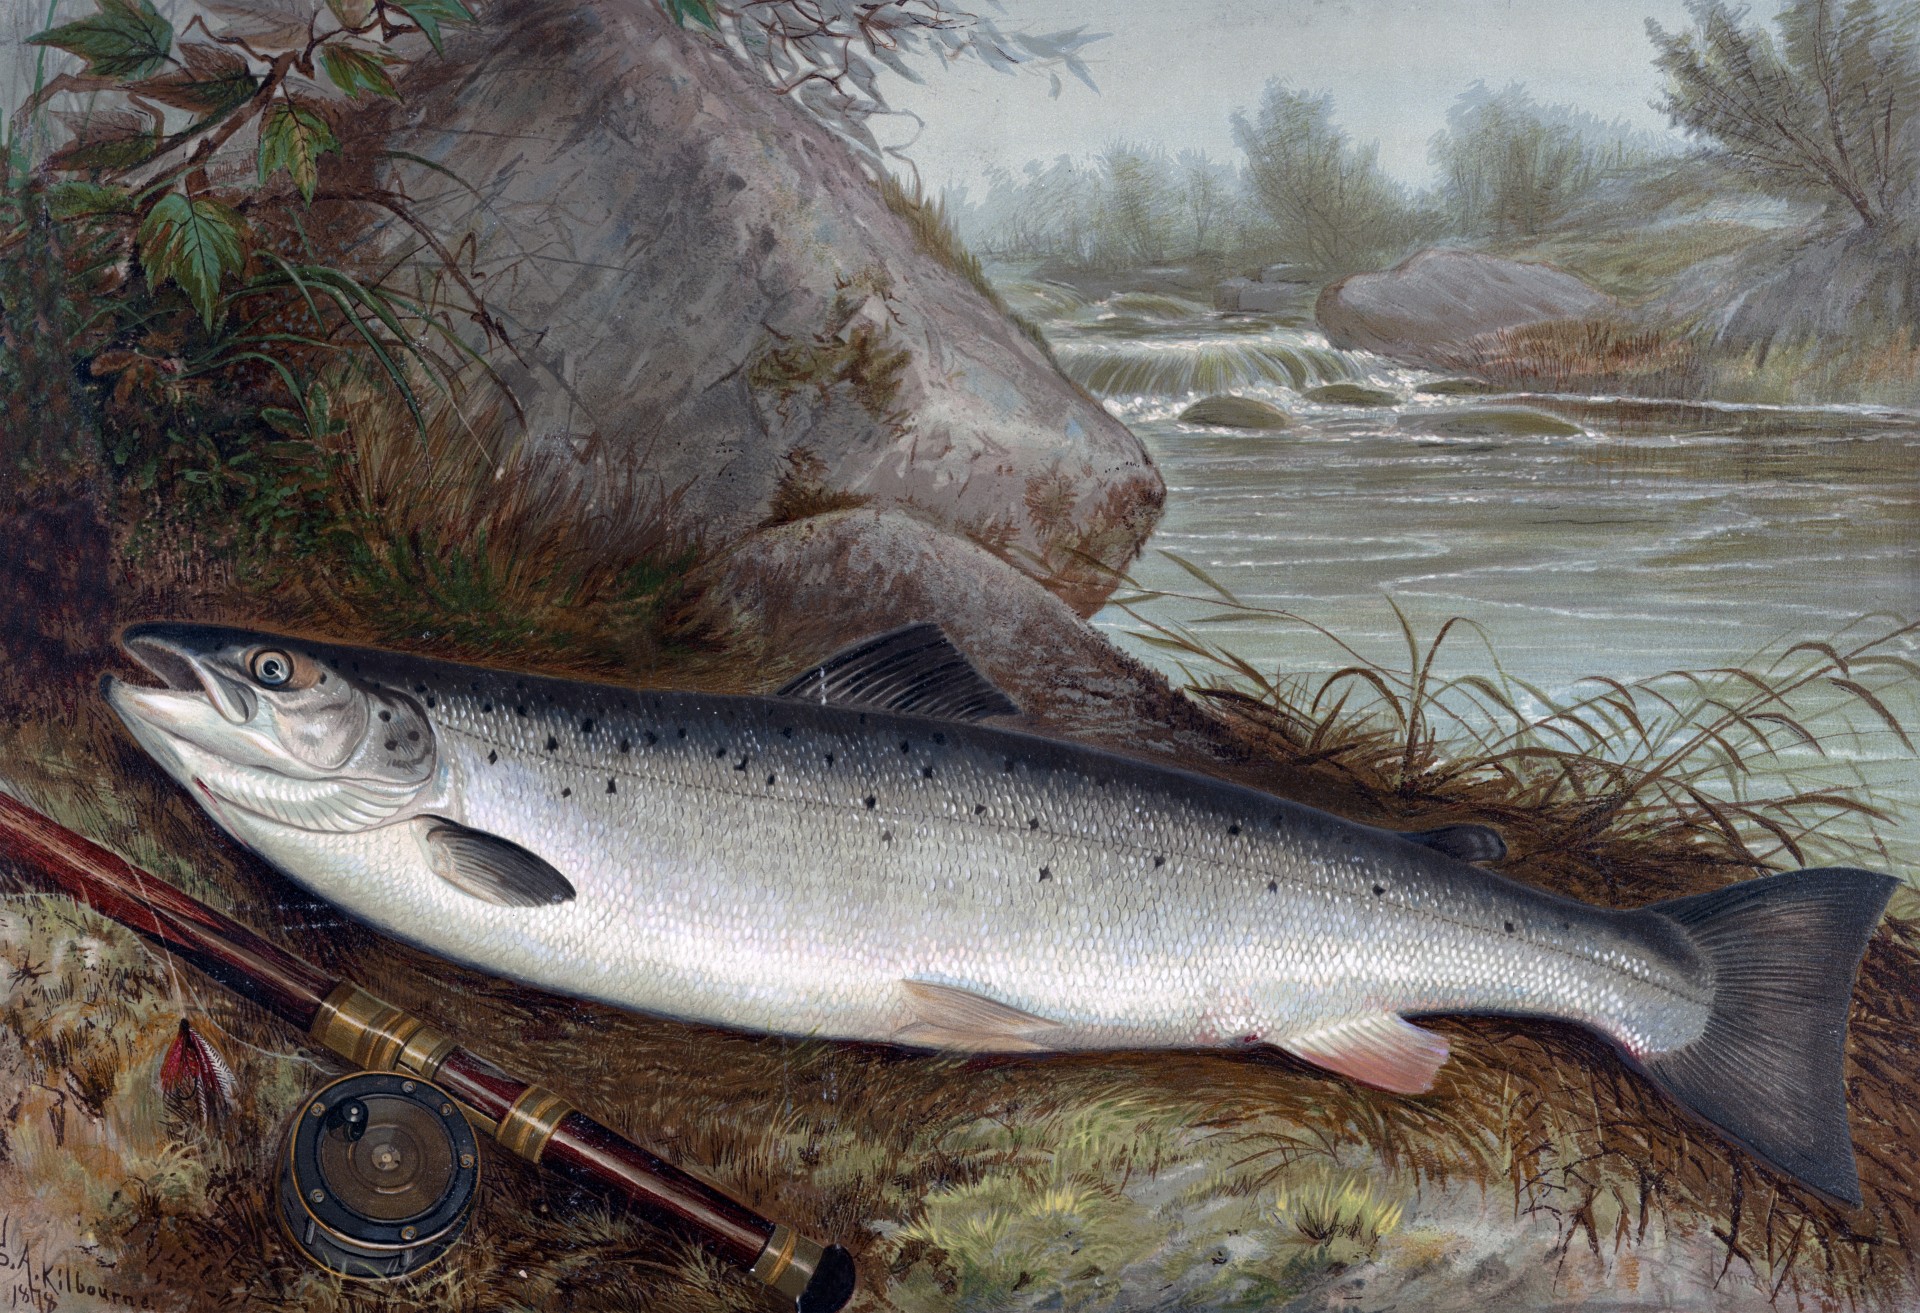 20 of the Most Realistic Fish Paintings You'll Ever See [PICS]